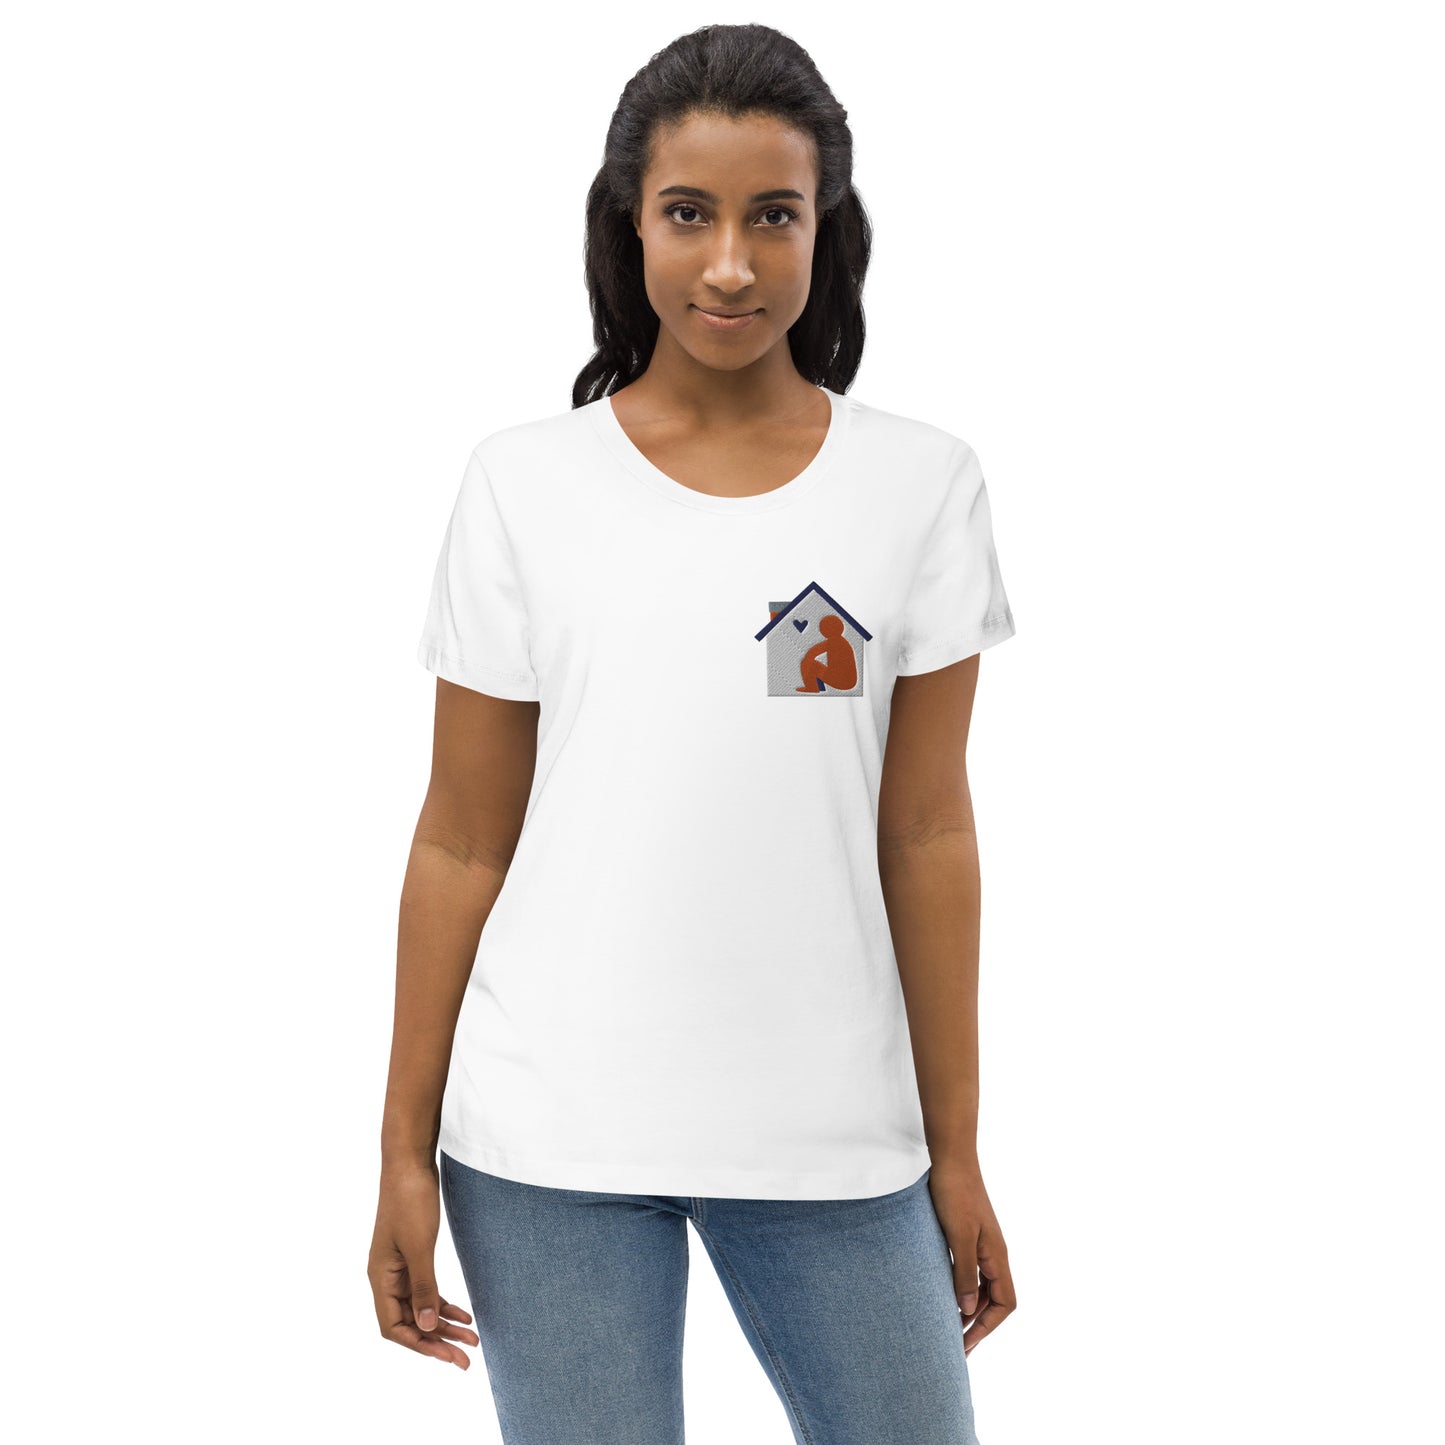 Housing is a Human Right - Women's fitted eco tee